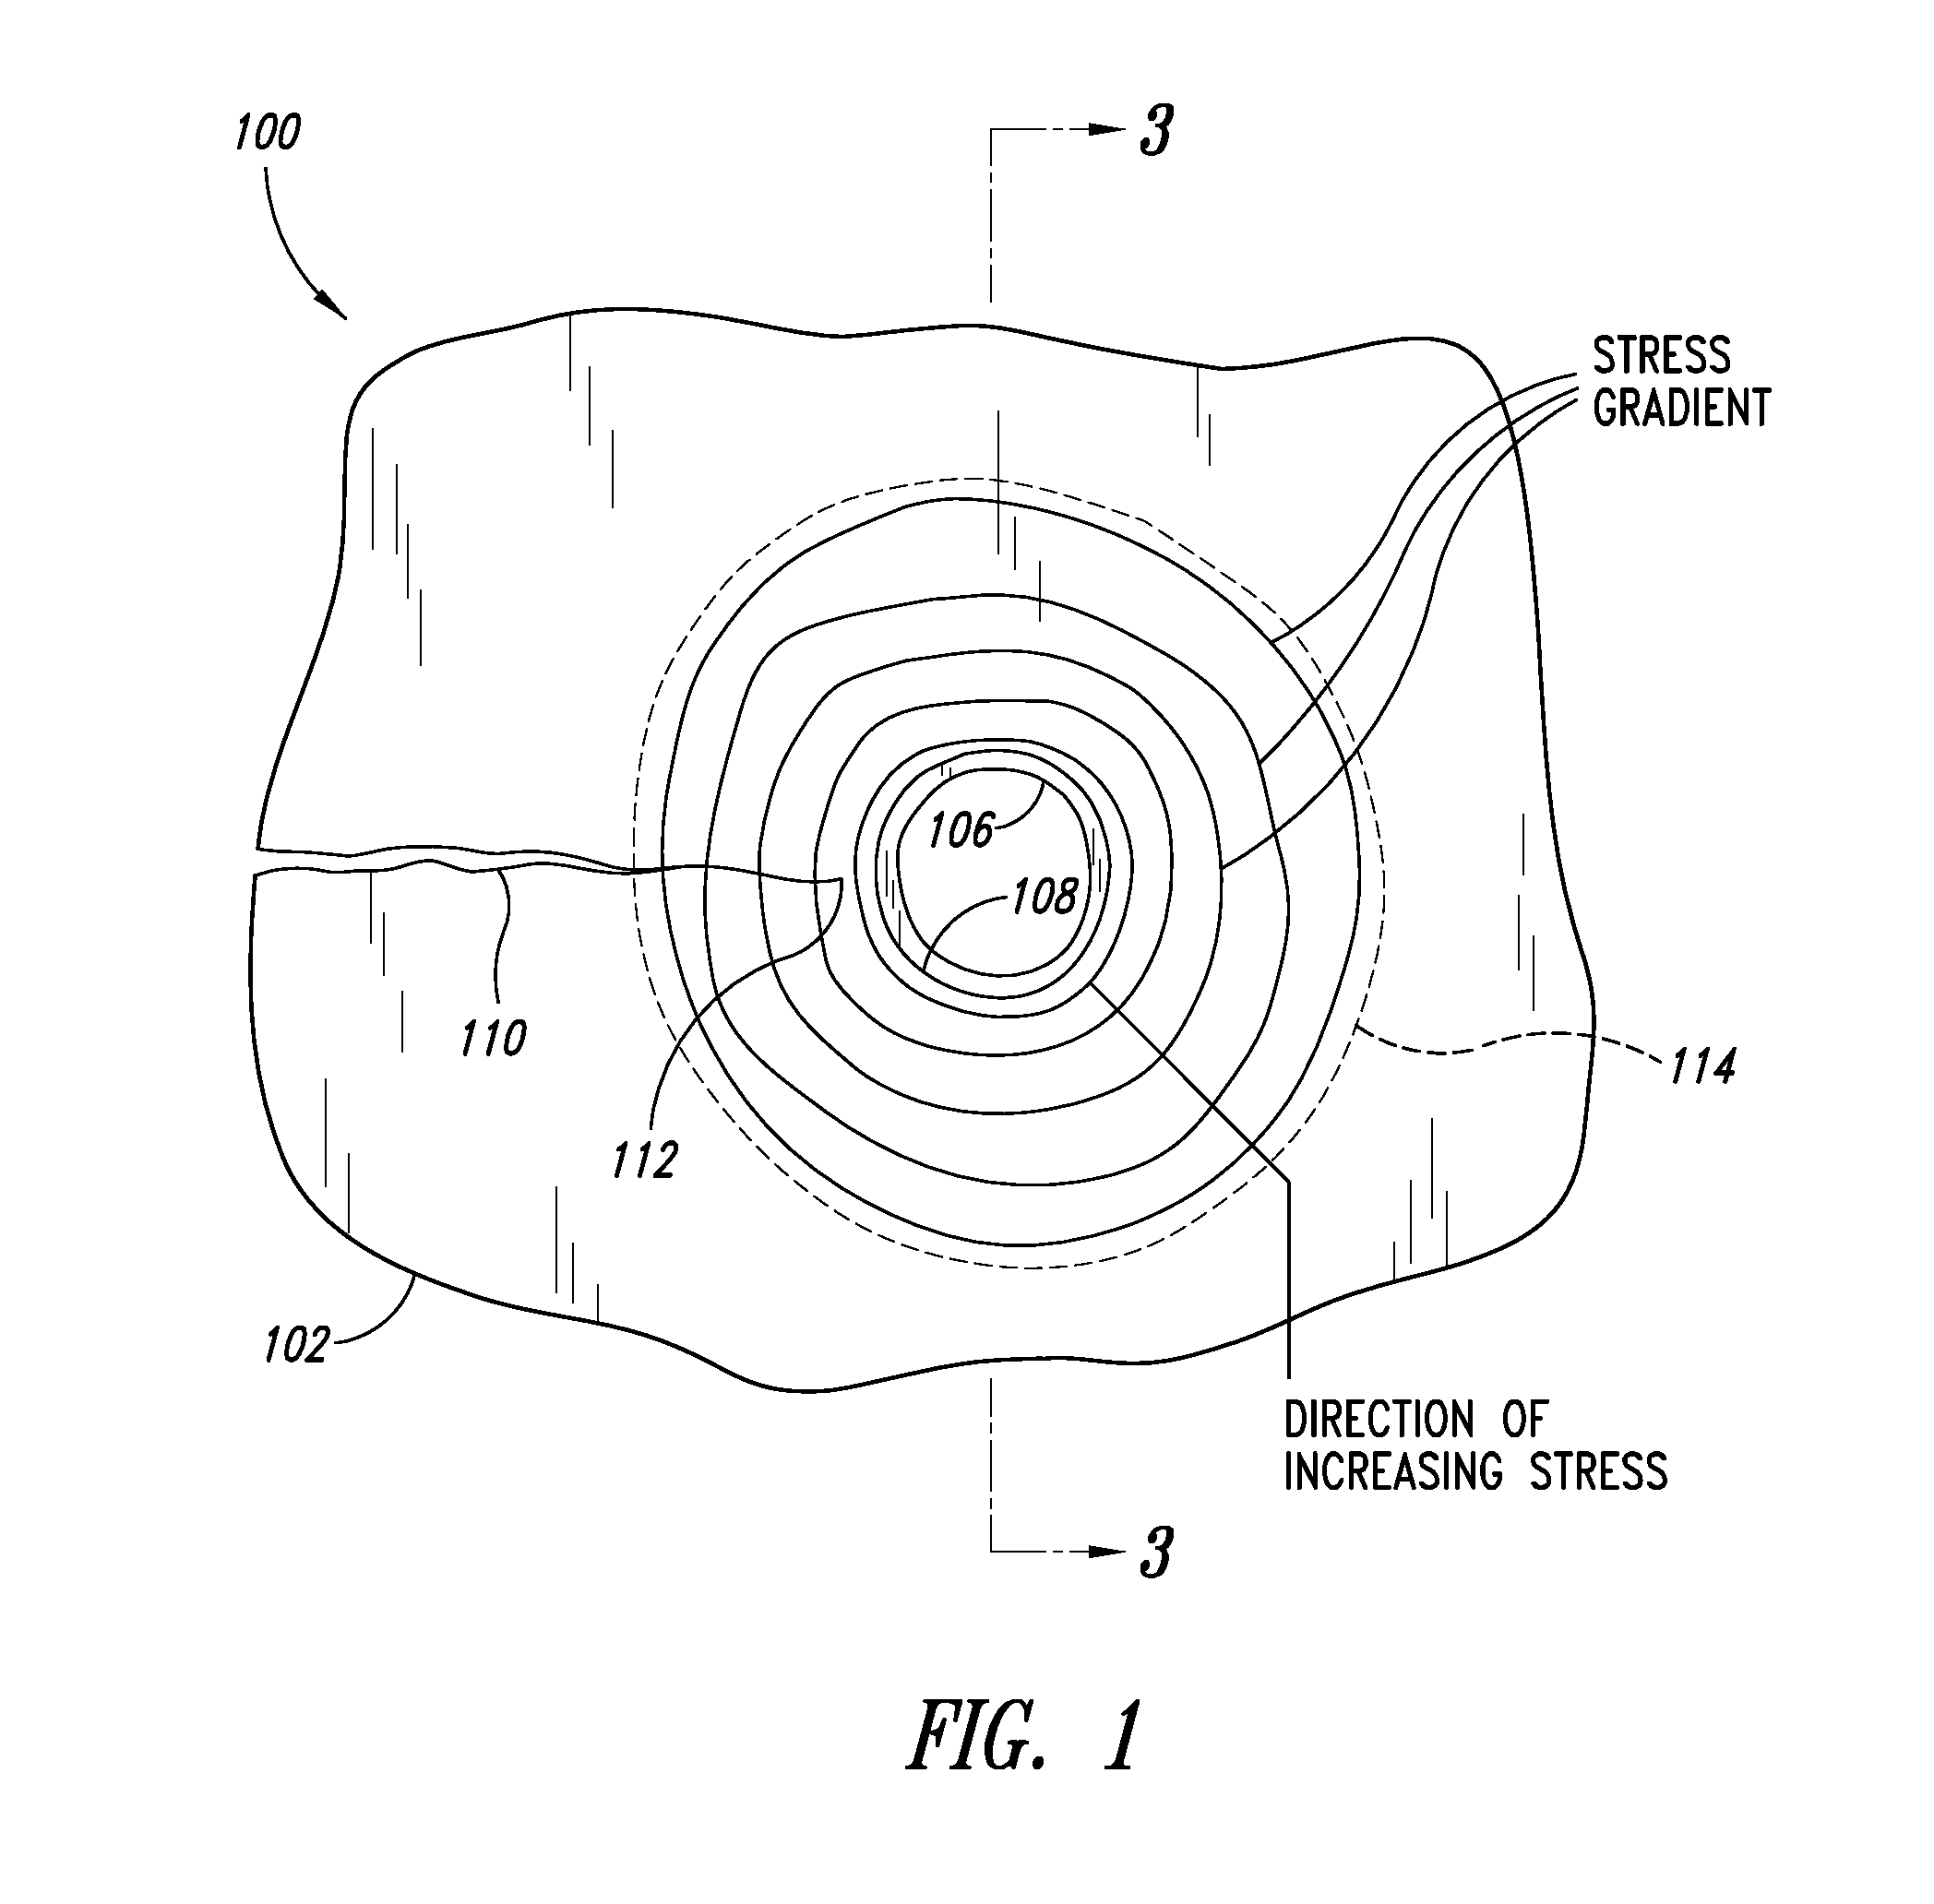 Expandable crack inhibitors and methods of using the same